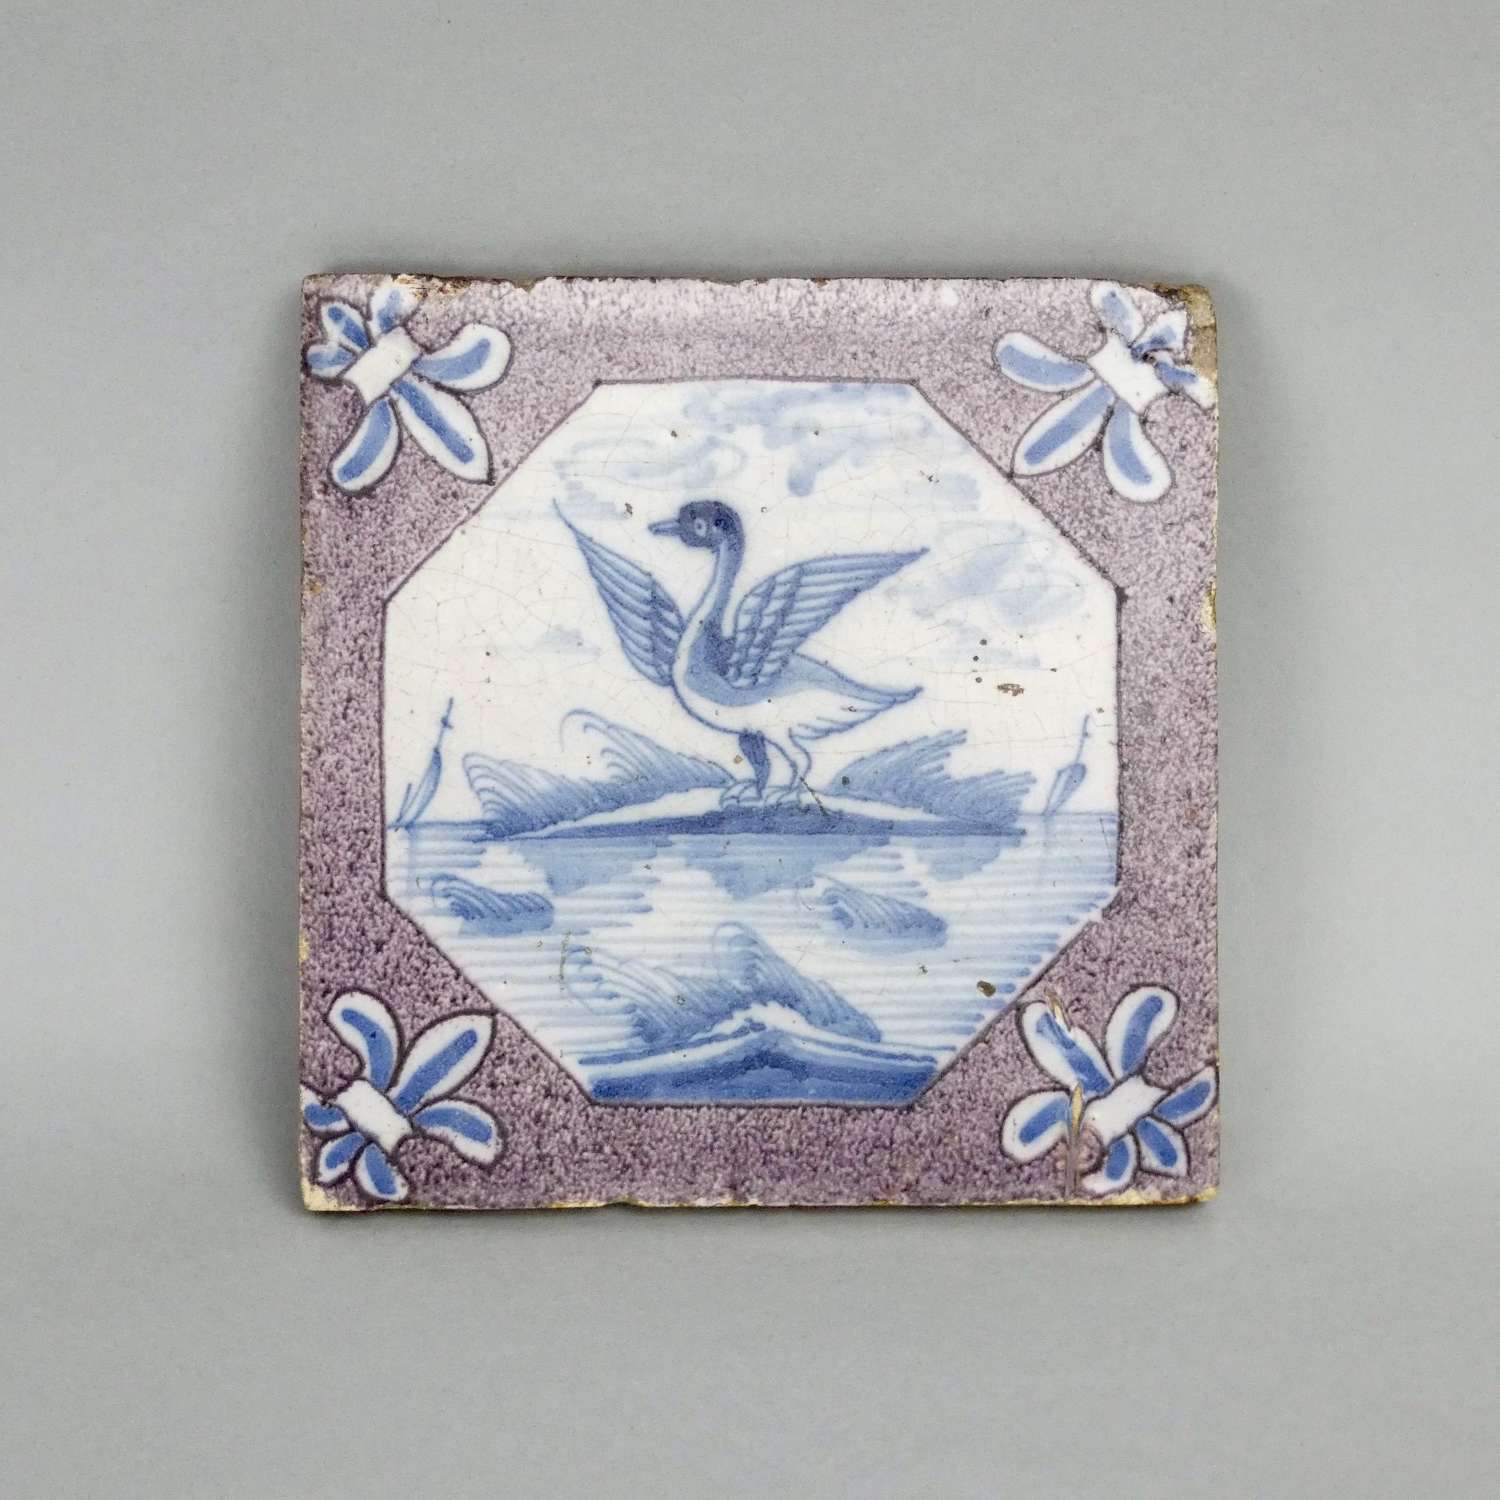 Delft tile painted with a swan